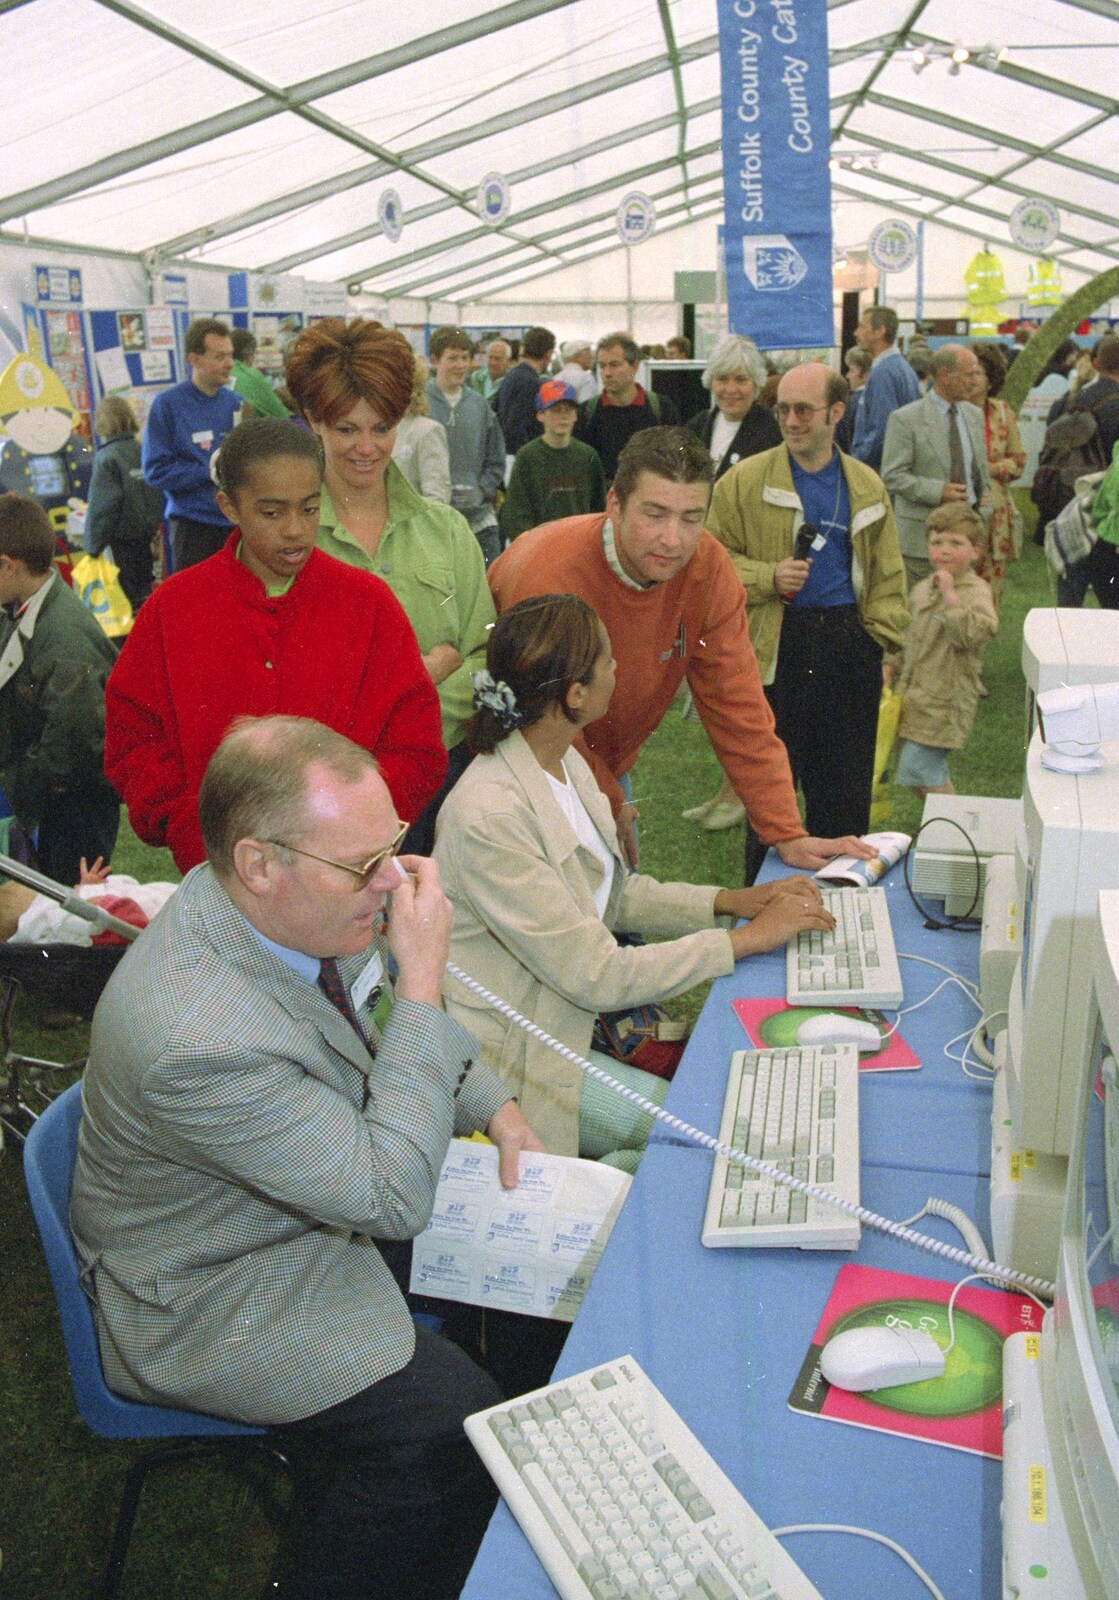 Peter Bye, SCC Chief Executive, takes a call from CISU do 'Internet-in-a-field', Suffolk Show, Ipswich - May 21st 1997